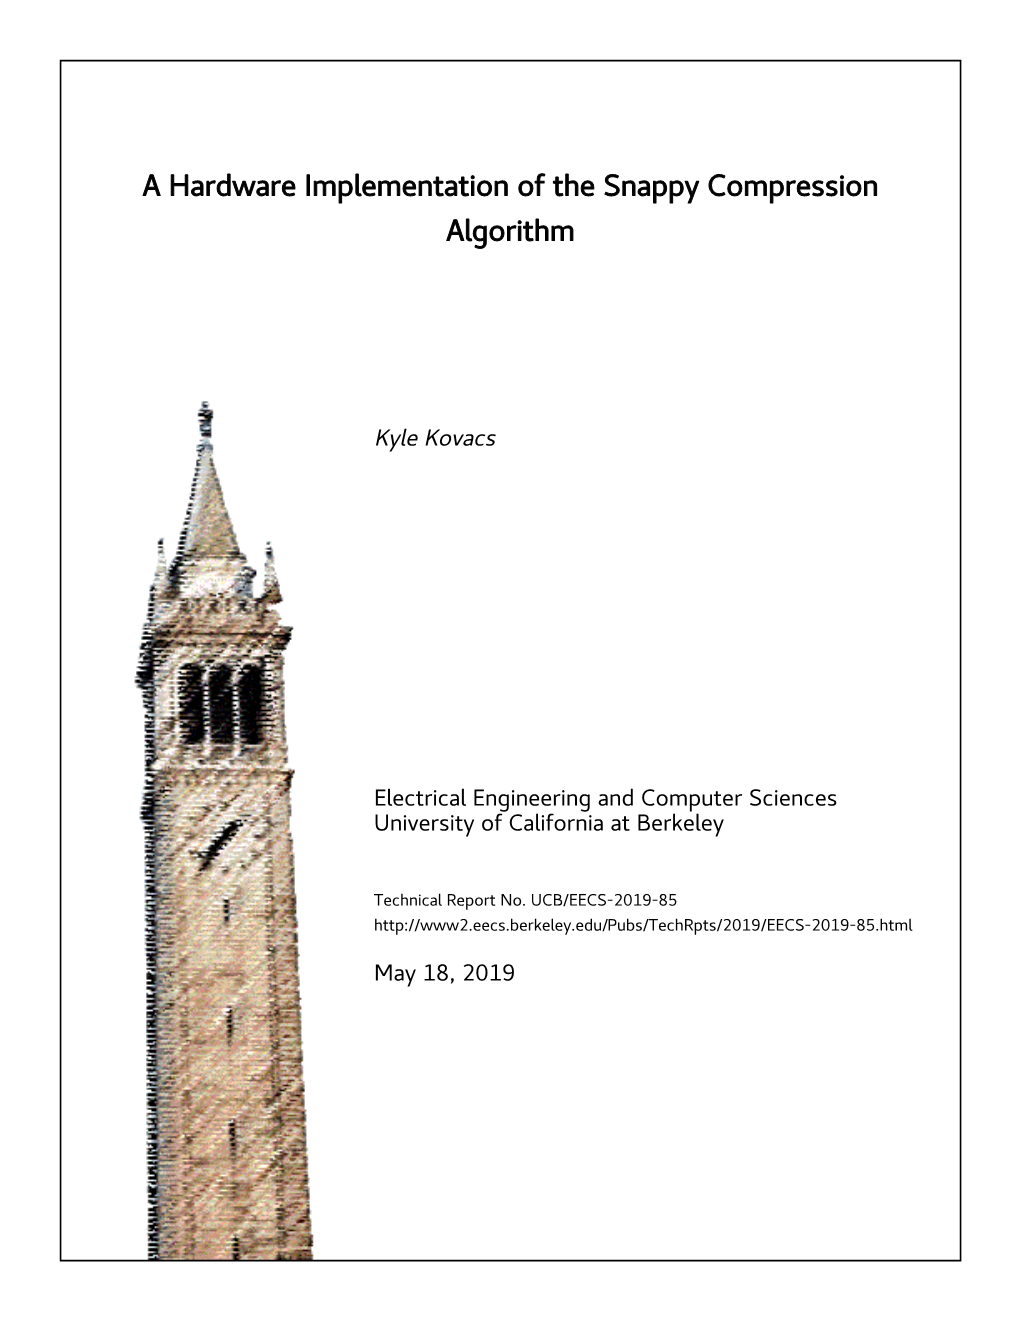 A Hardware Implementation of the Snappy Compression Algorithm